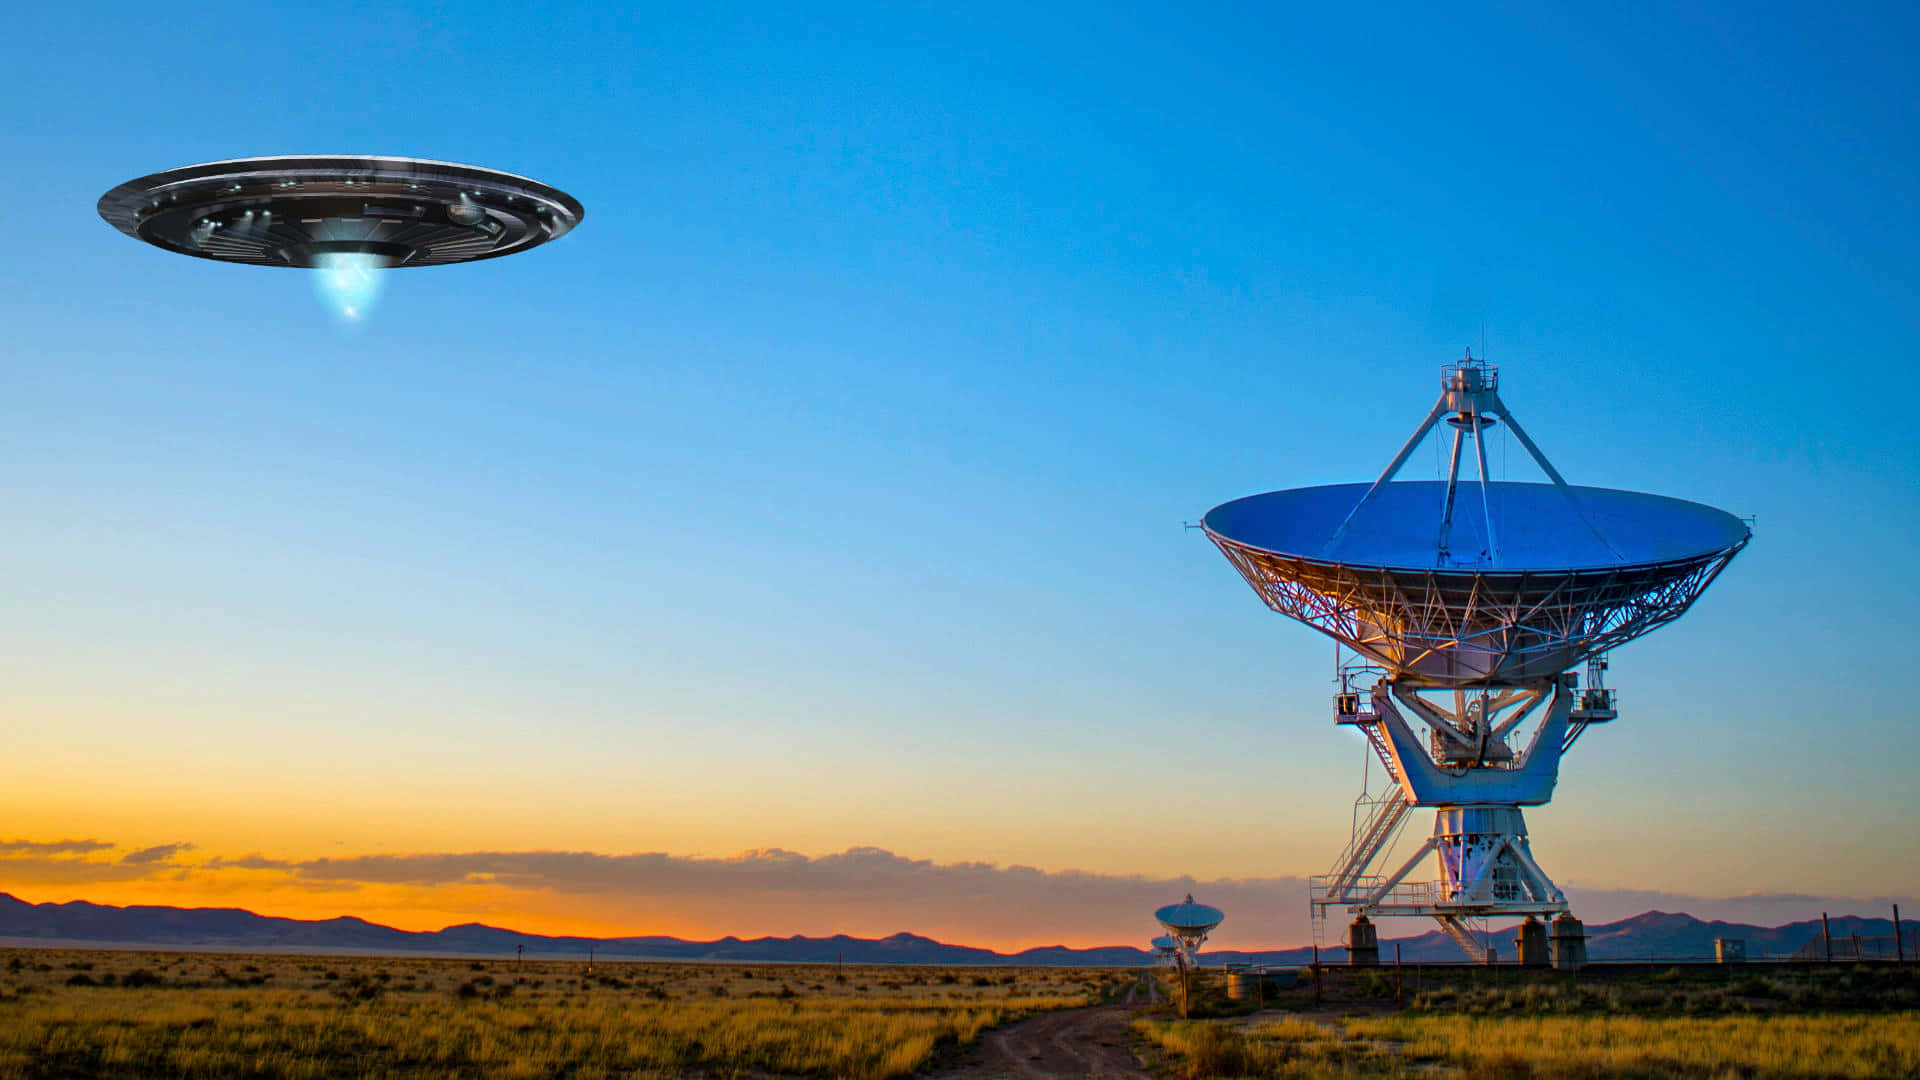 "Sightings of mysterious Unidentified Flying Objects have sparked curiosity around the world"